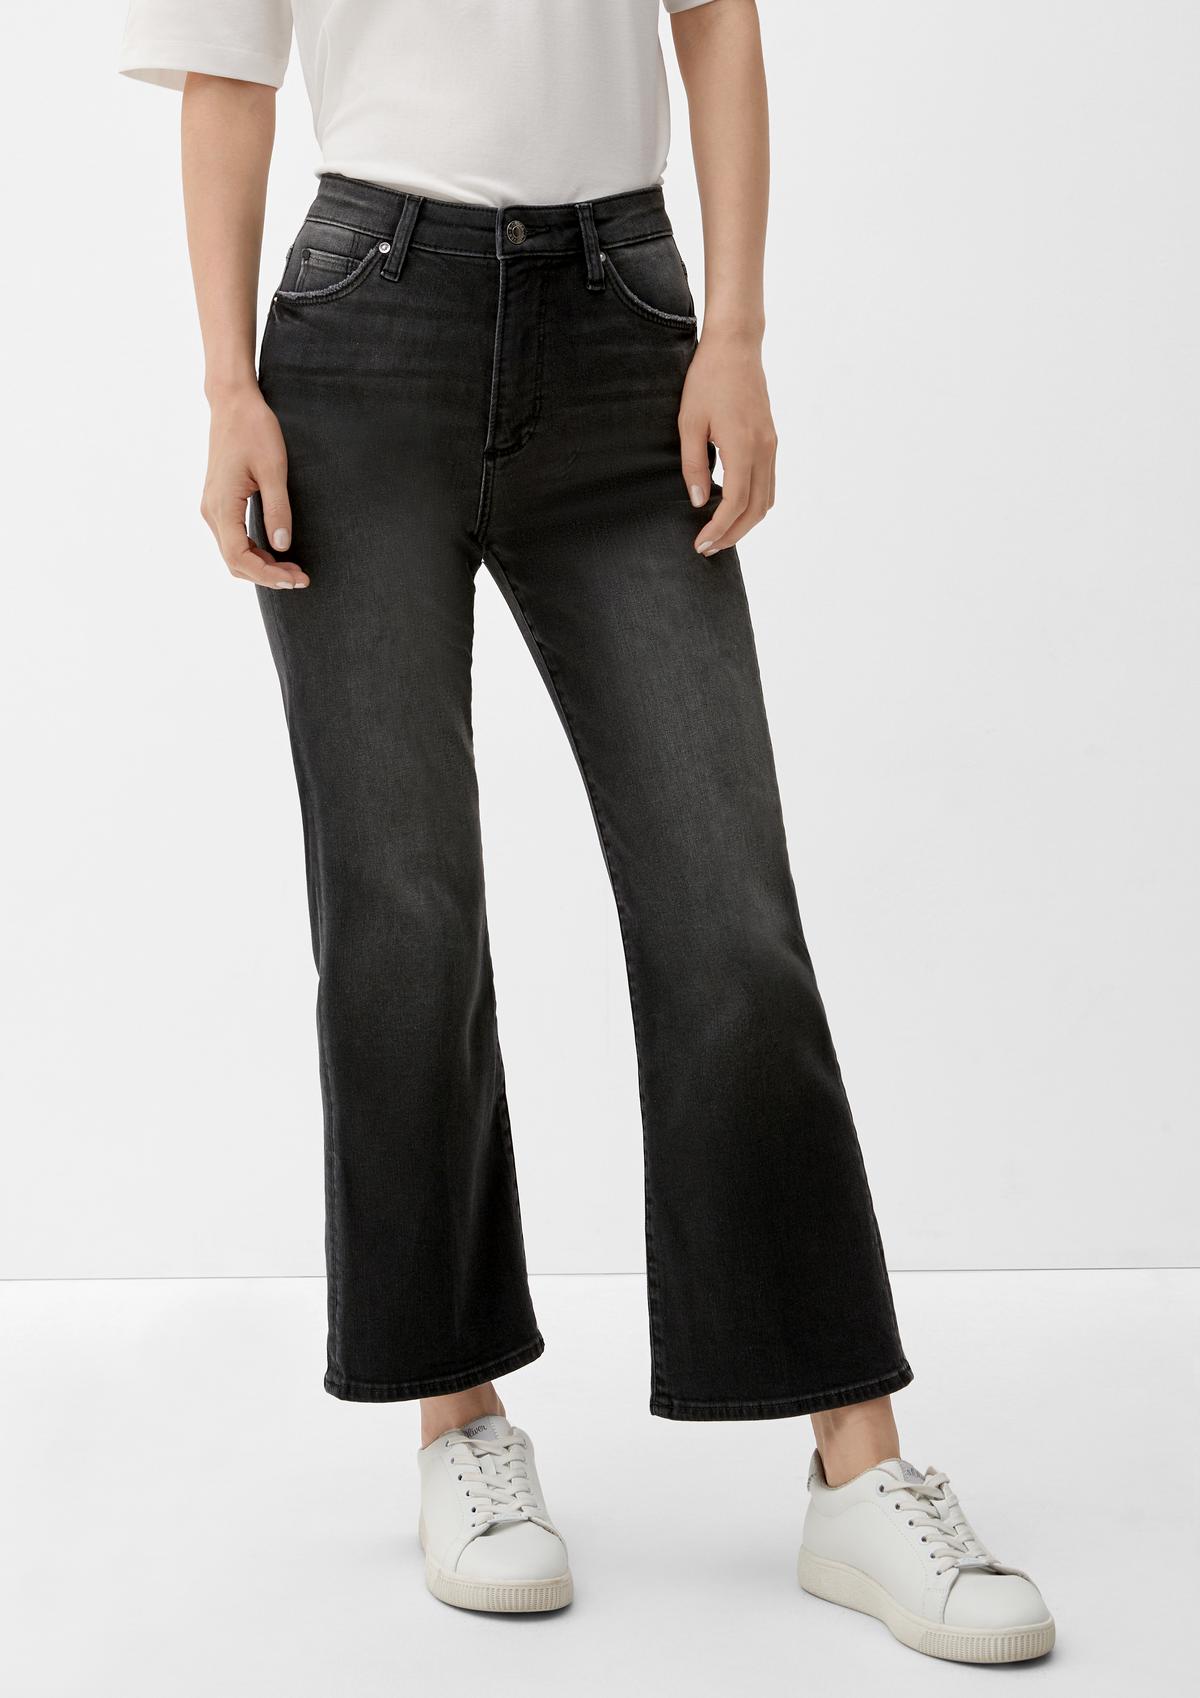 Cropped-Jeans Flared / Slim Fit / High Rise / Flared Leg